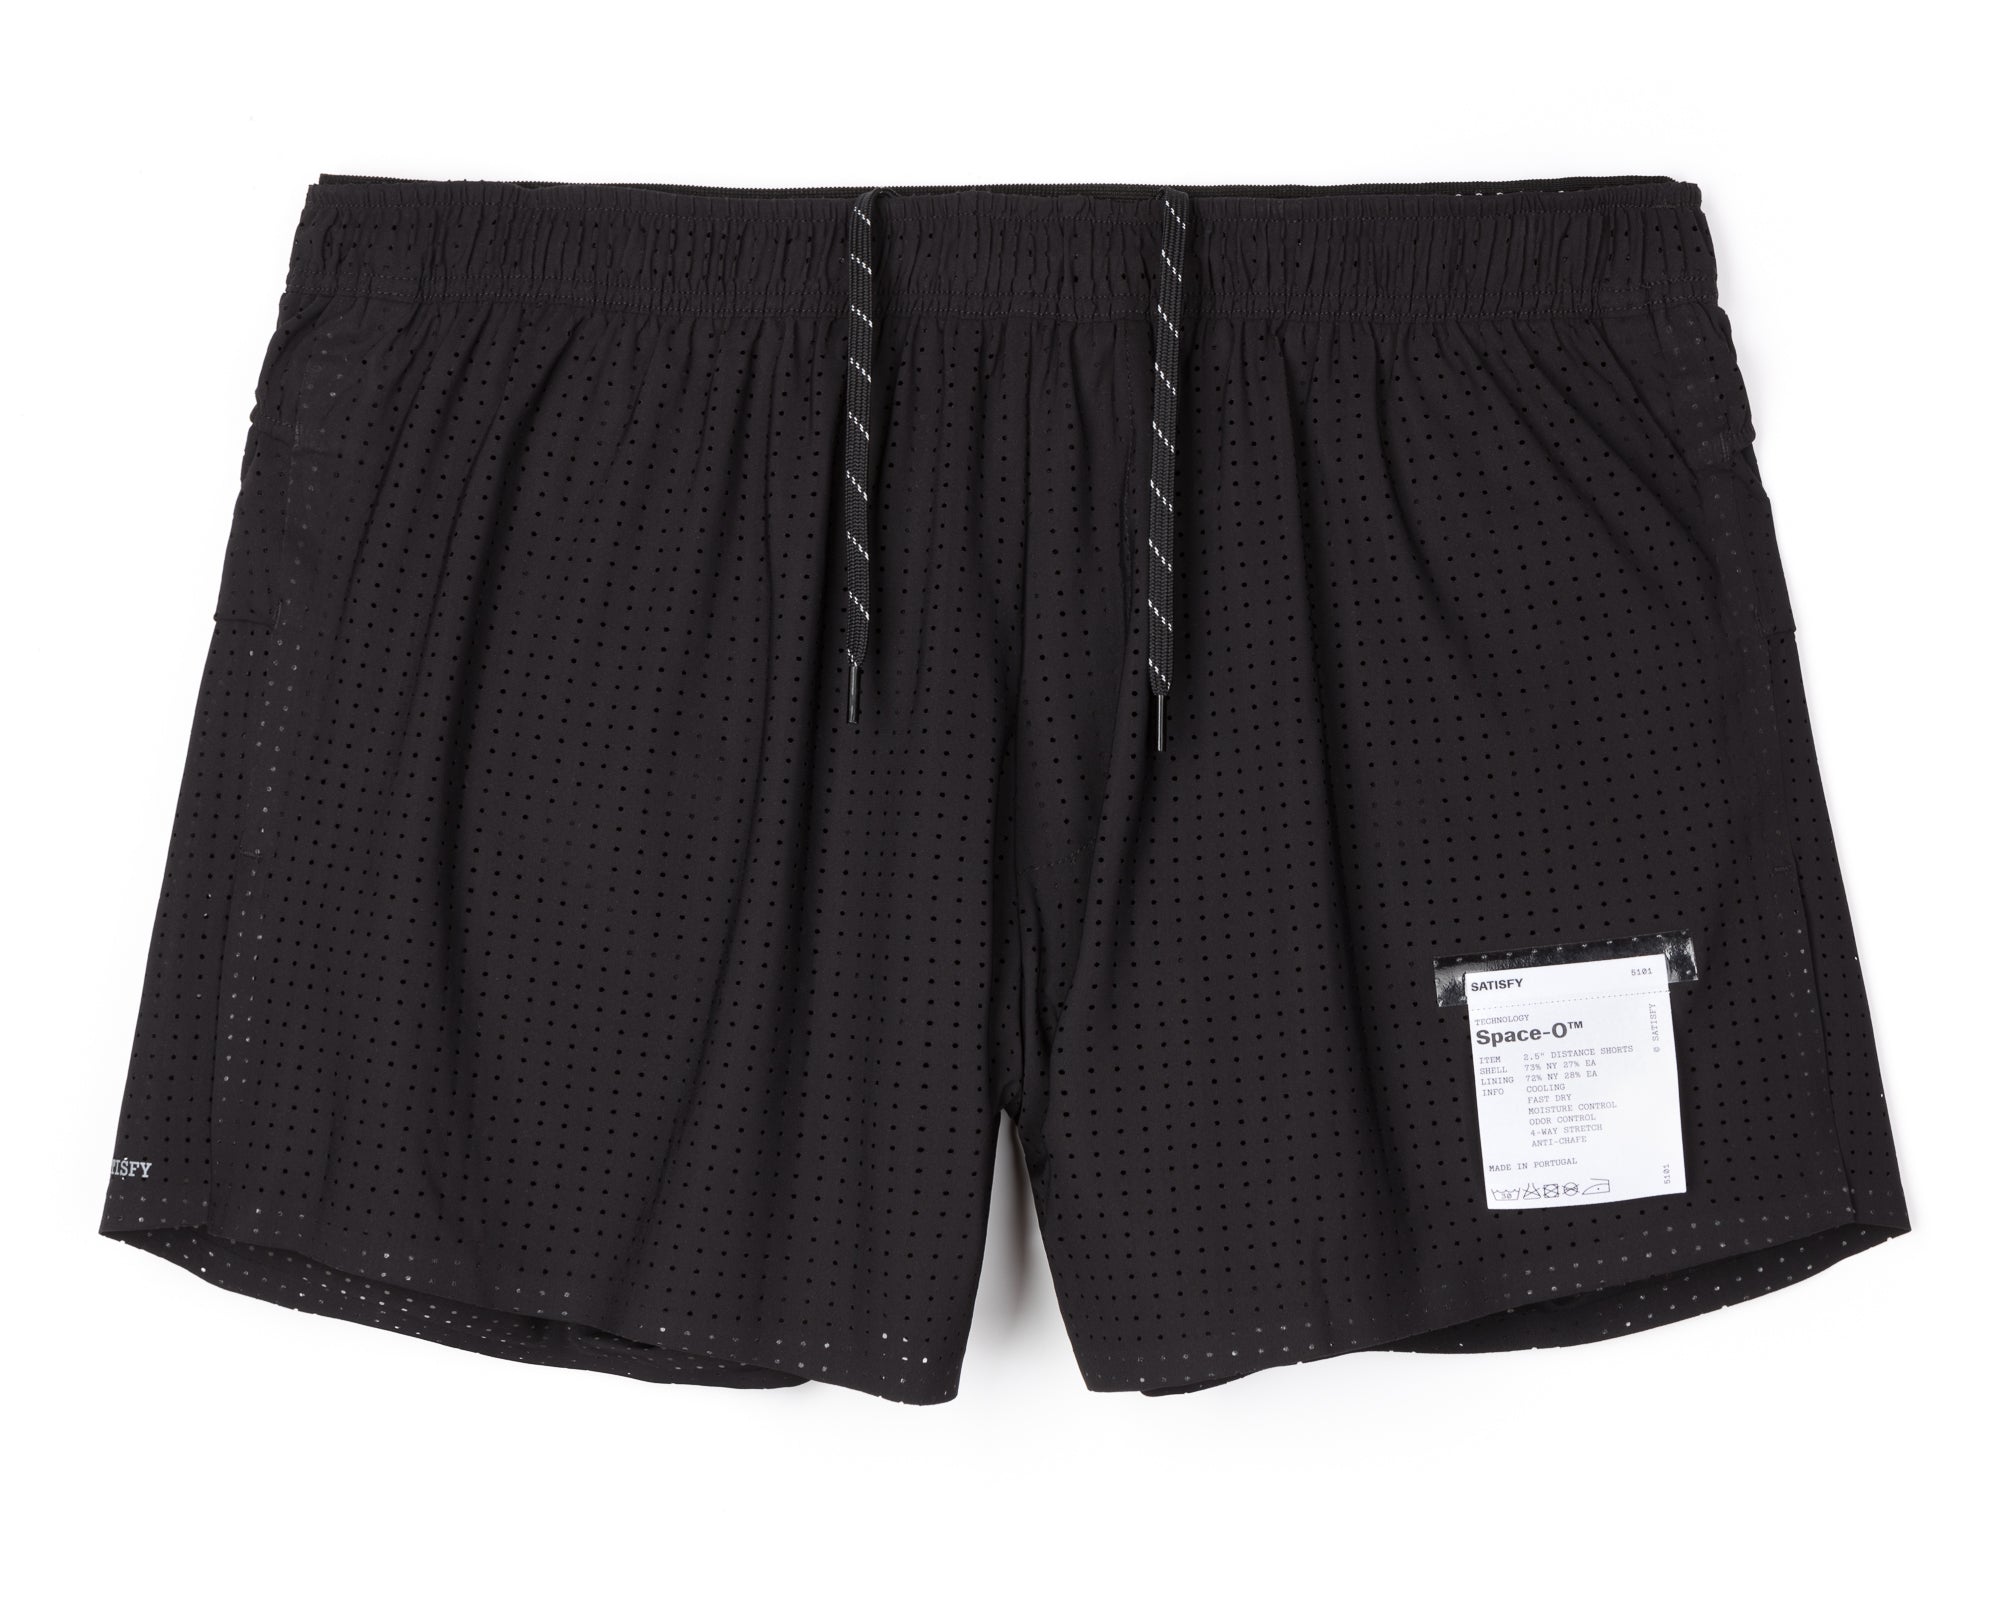 ON Active Shorts – 2 in 1 shorts (W) – Black/Stratosphere – Best